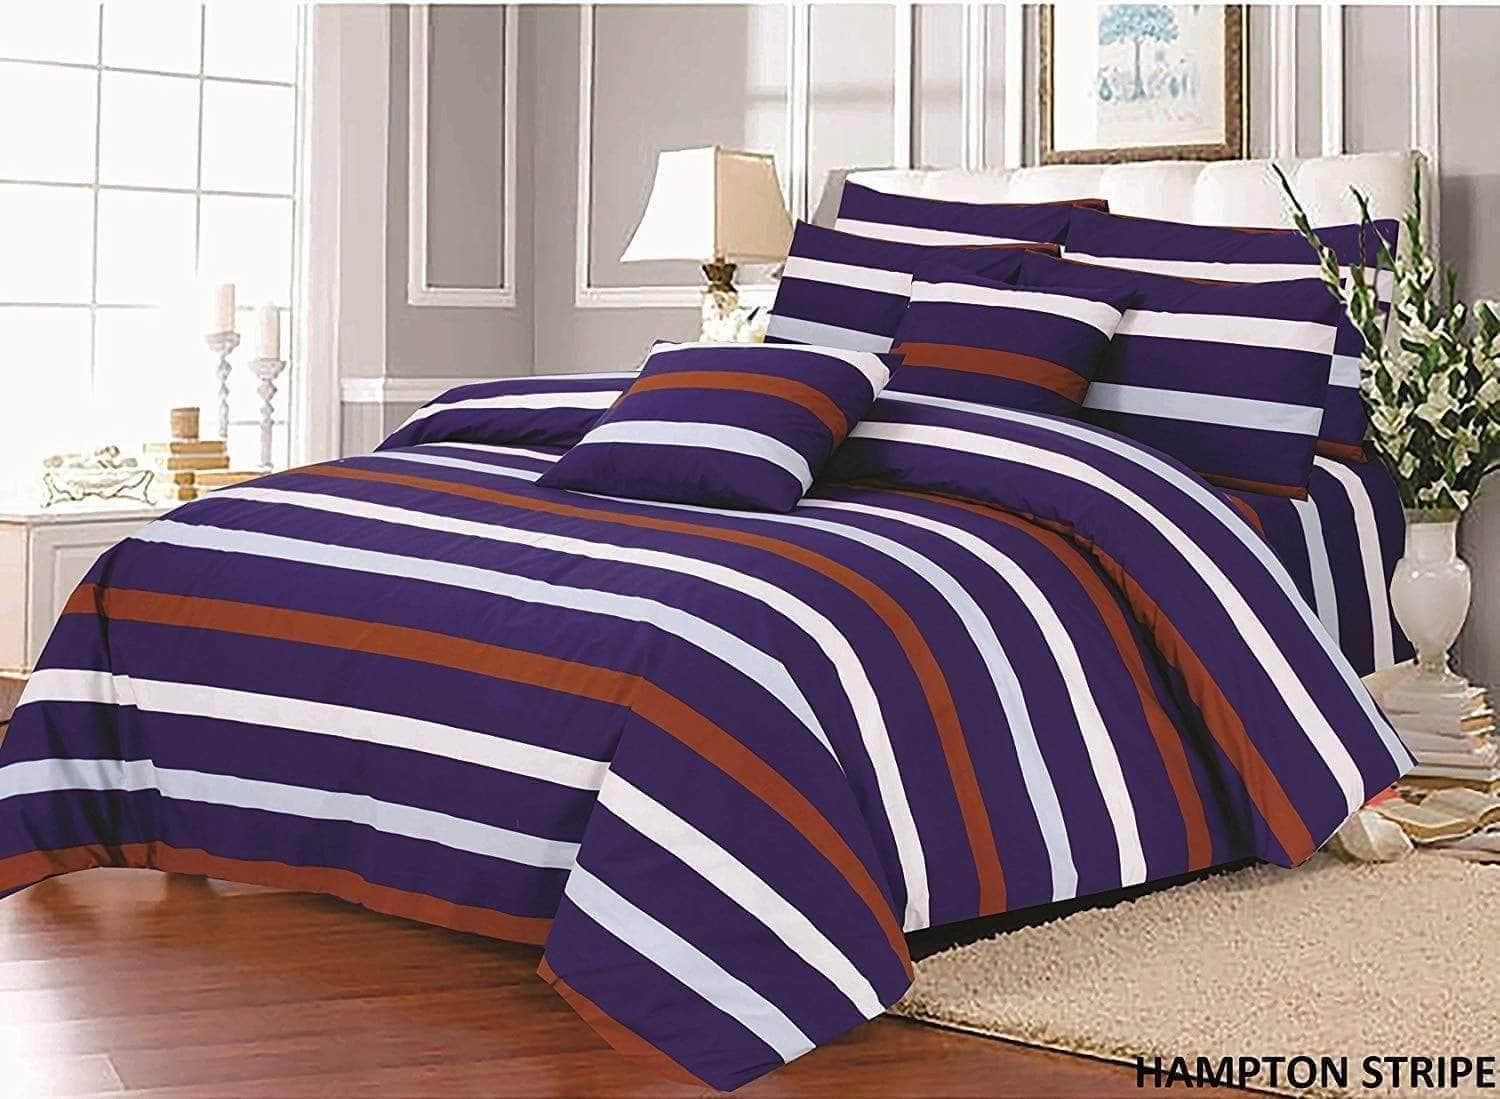 Striped Duvet Covers Set With Pillowcases